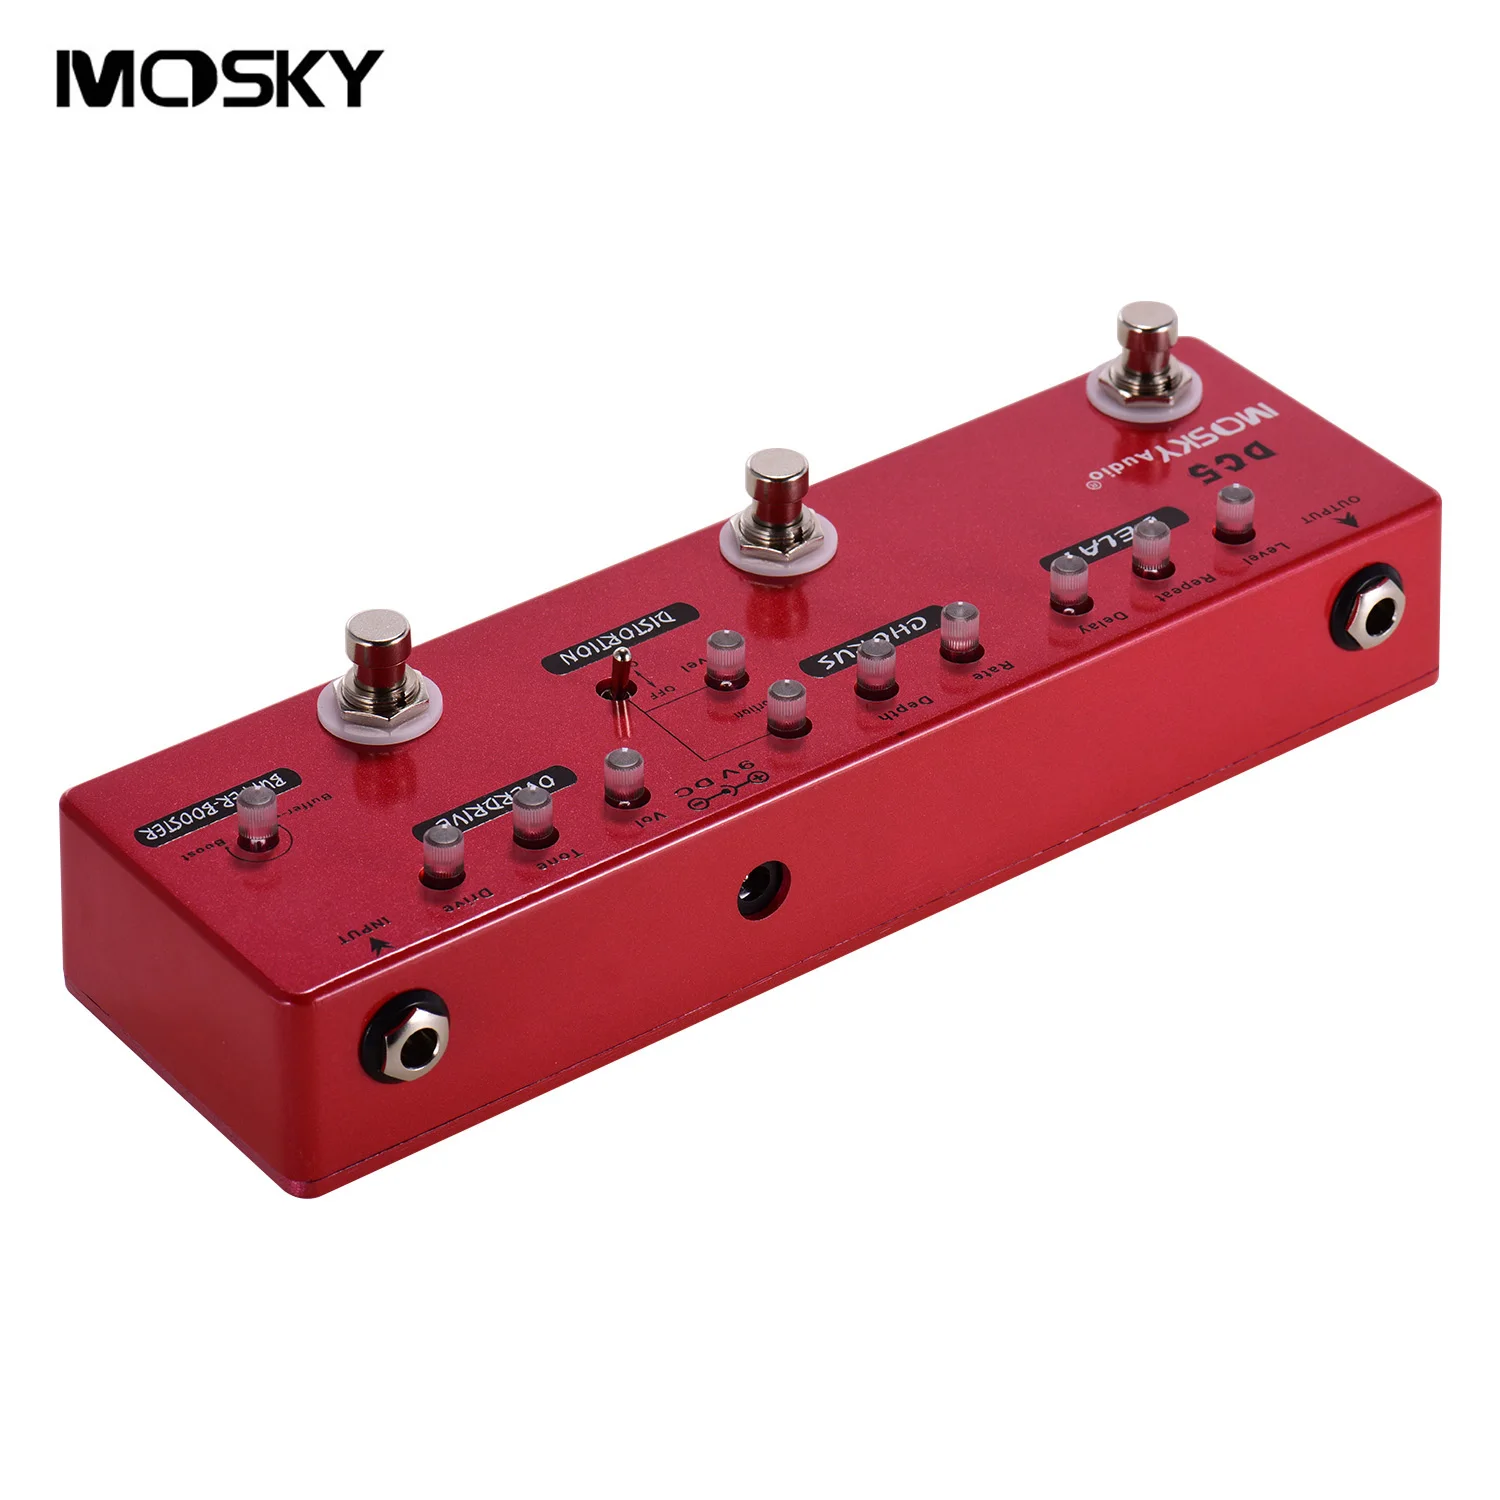 

MOSKY DC5 6-in-1 Guitar Multi-Effects Pedal Delay Chorus Distortion Overdrive Booster Buffer Full Metal Shell with True Bypass